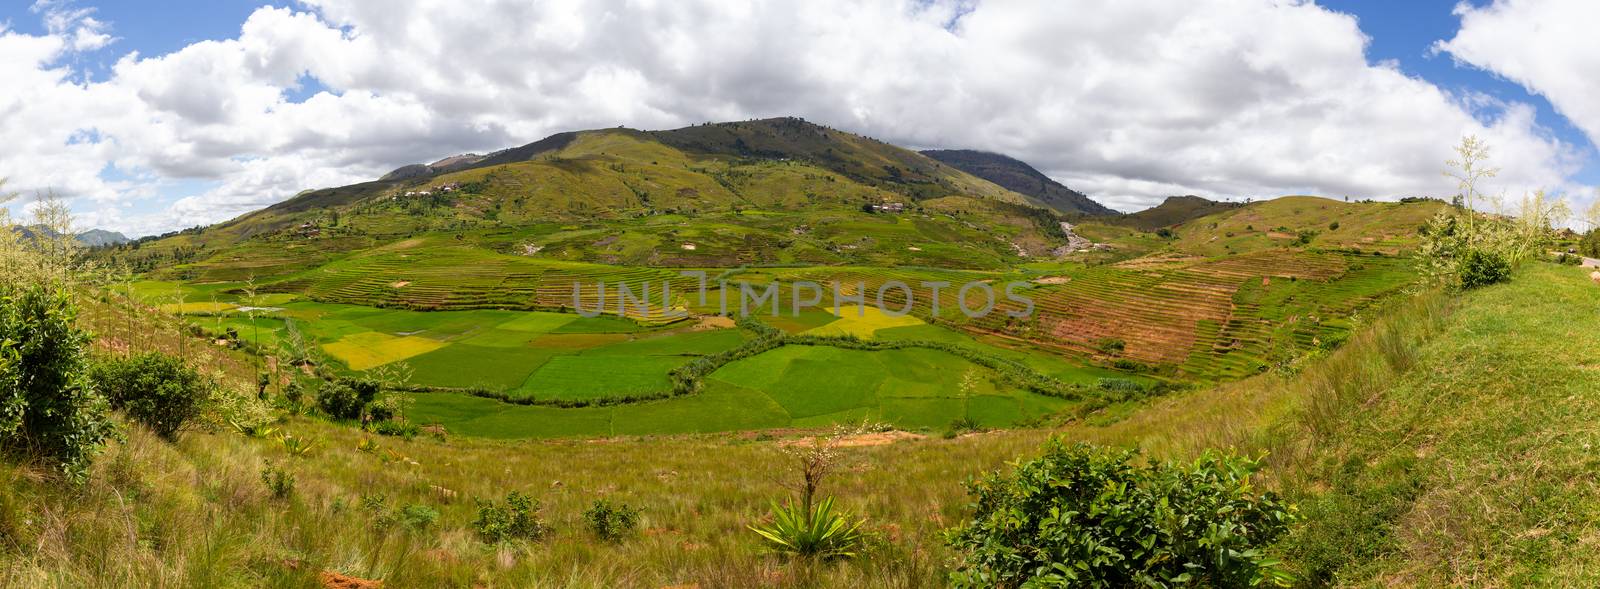 A landscape shot as a panoramic image of the beauty of Madagascar by 25ehaag6